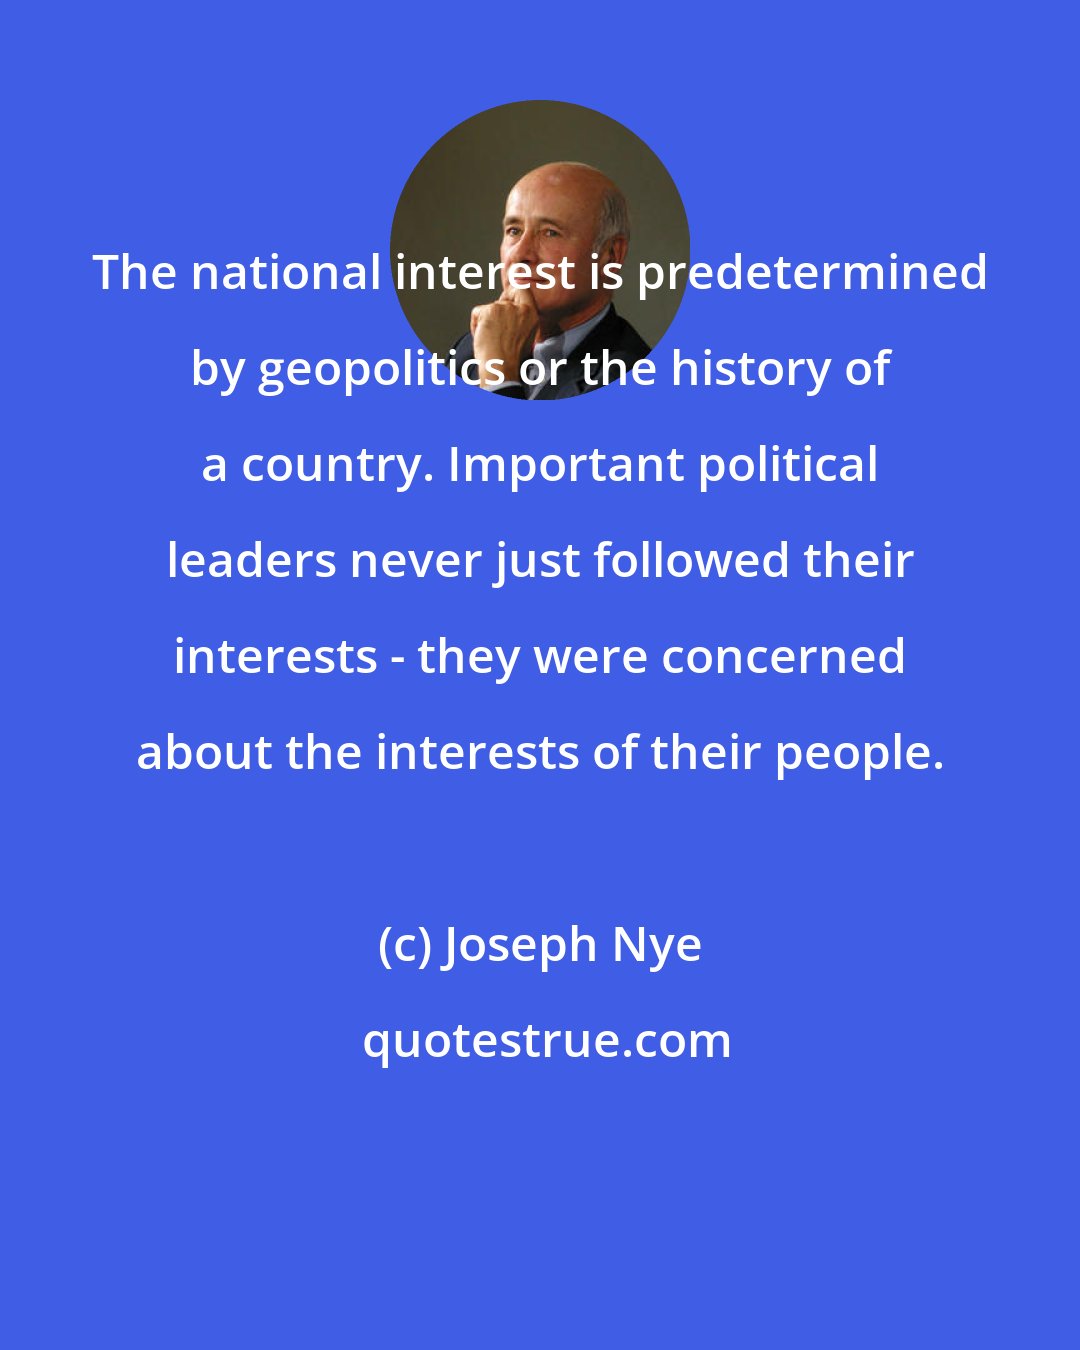 Joseph Nye: The national interest is predetermined by geopolitics or the history of a country. Important political leaders never just followed their interests - they were concerned about the interests of their people.